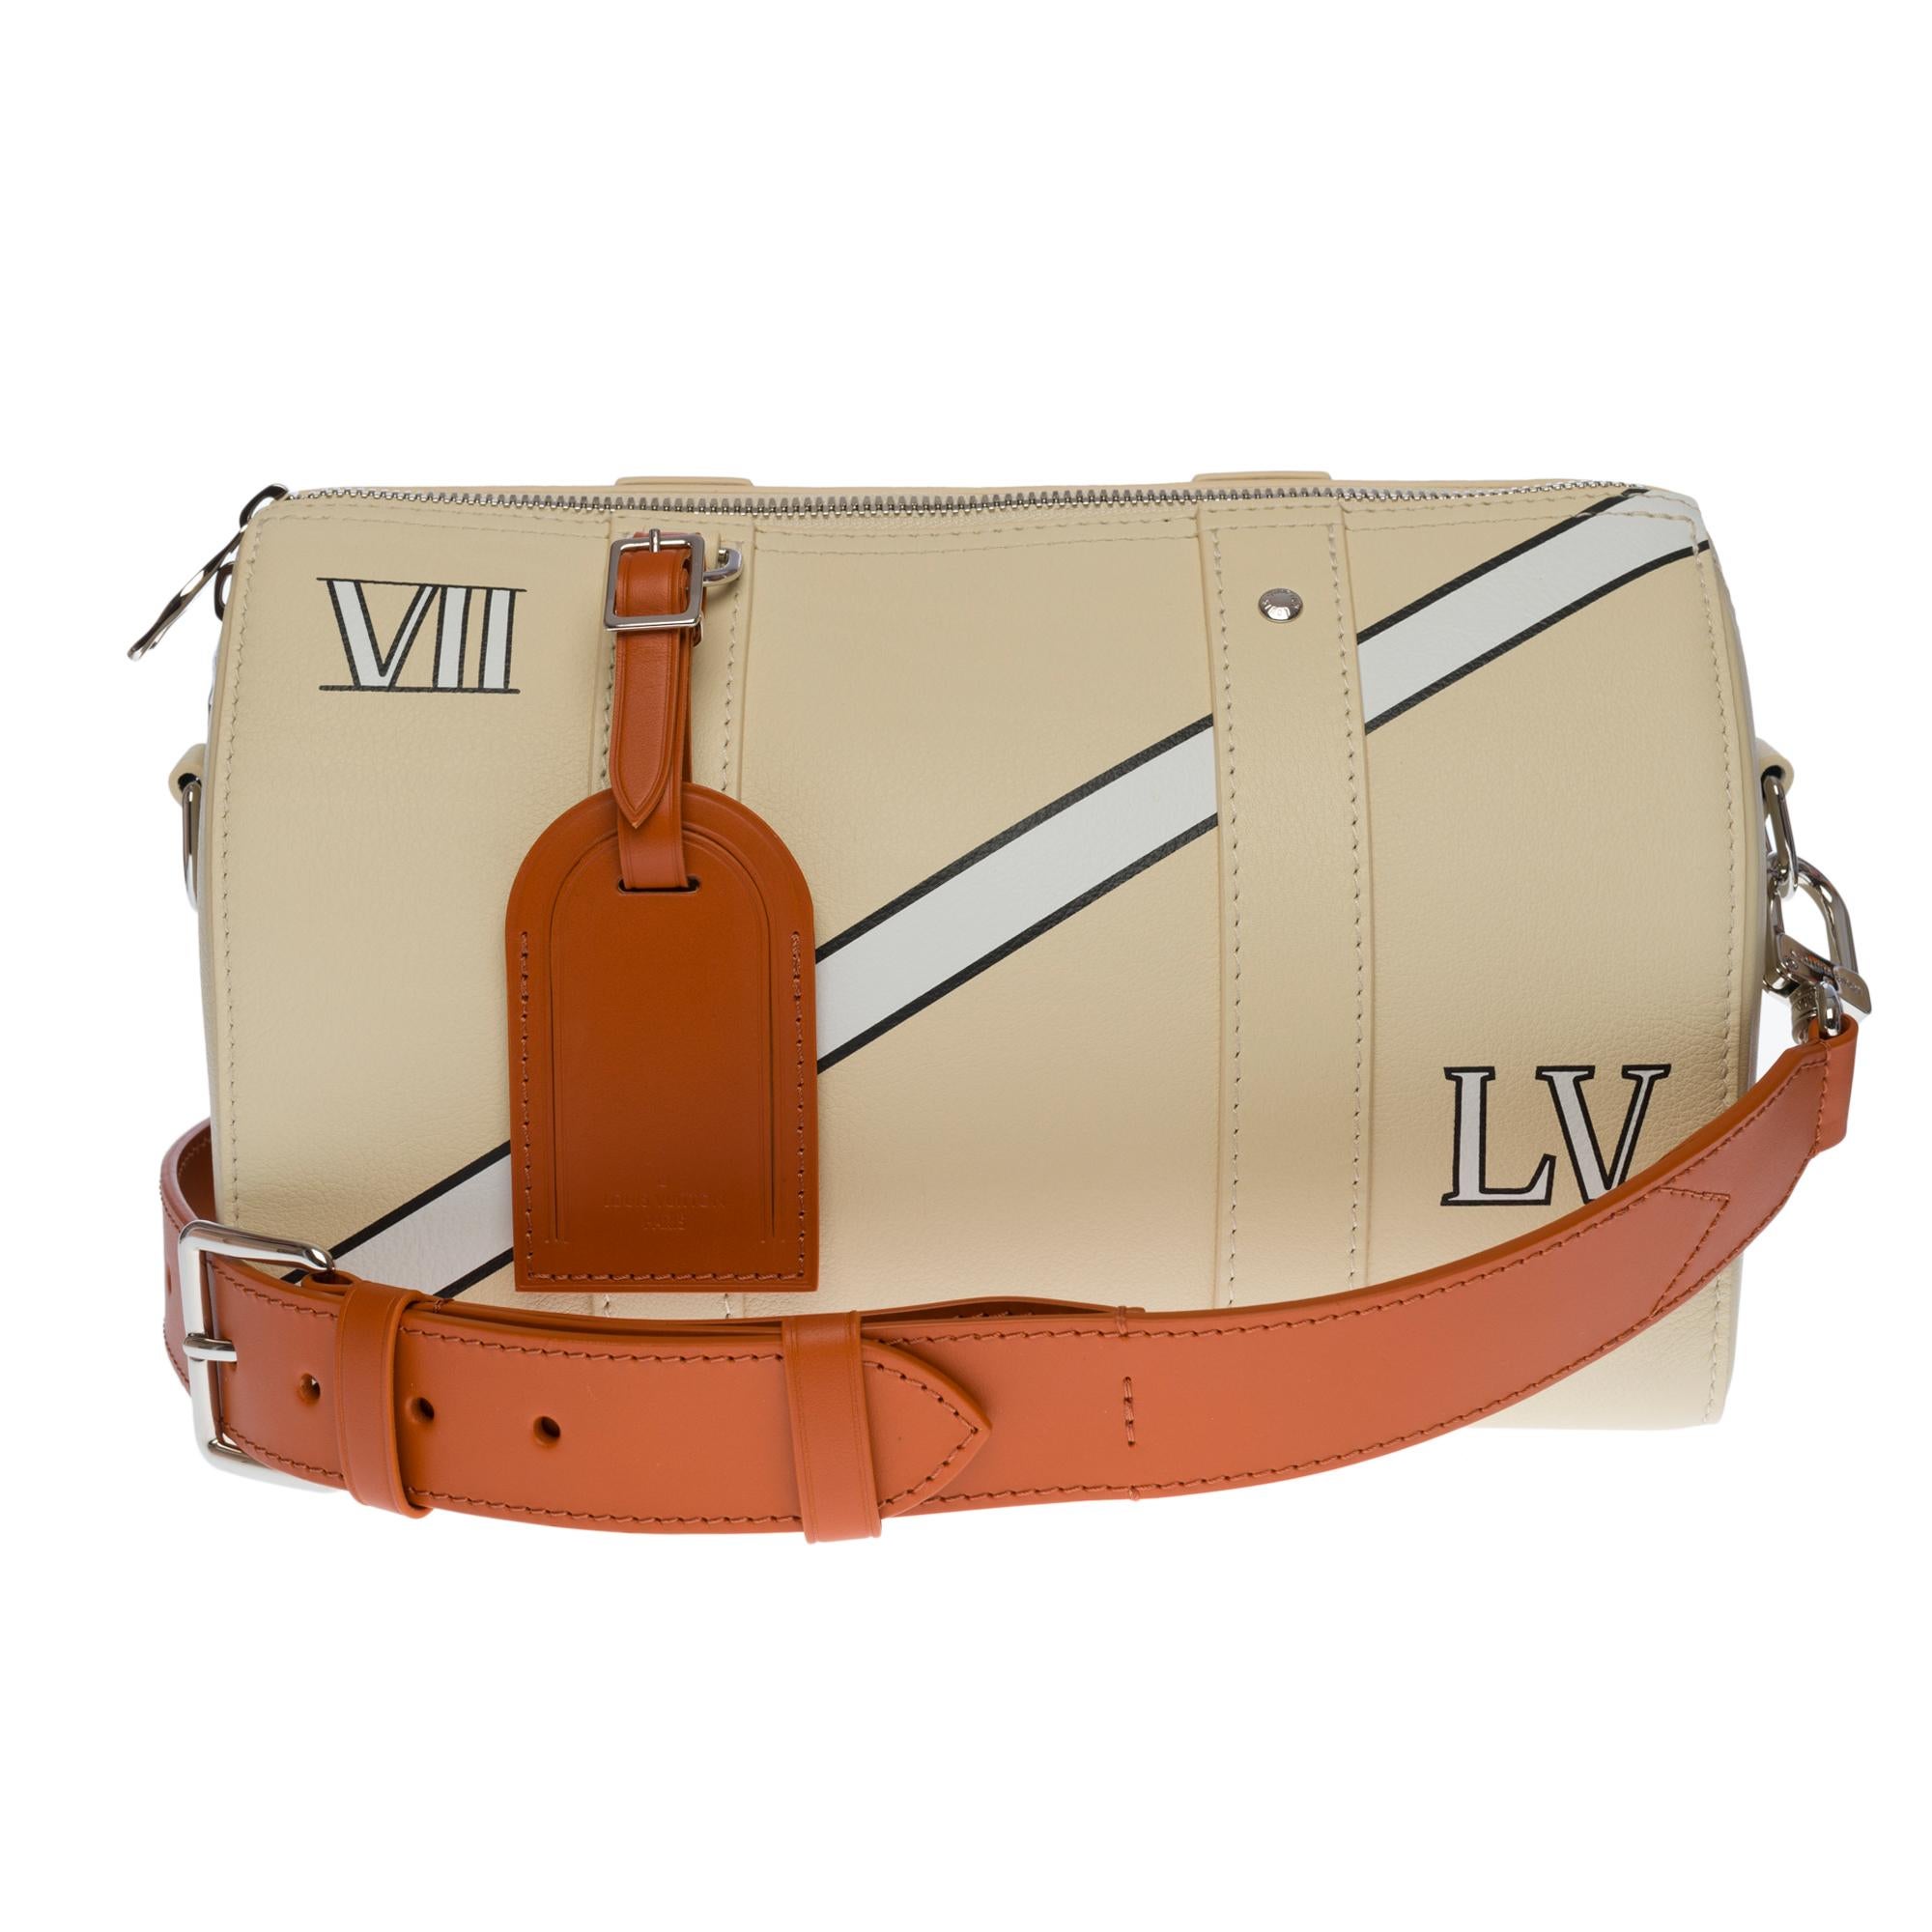 ULTRA EXCLUSIVE - SOLD OUT - VIRGIL ABLOH COLLECTION

From the Trunk L'Œil capsule collection, this City Keepall bag by Virgil Abloh is crafted from calf leather in shades reminiscent of 1920s and 1930s suitcases. The diagonal stripe and leather